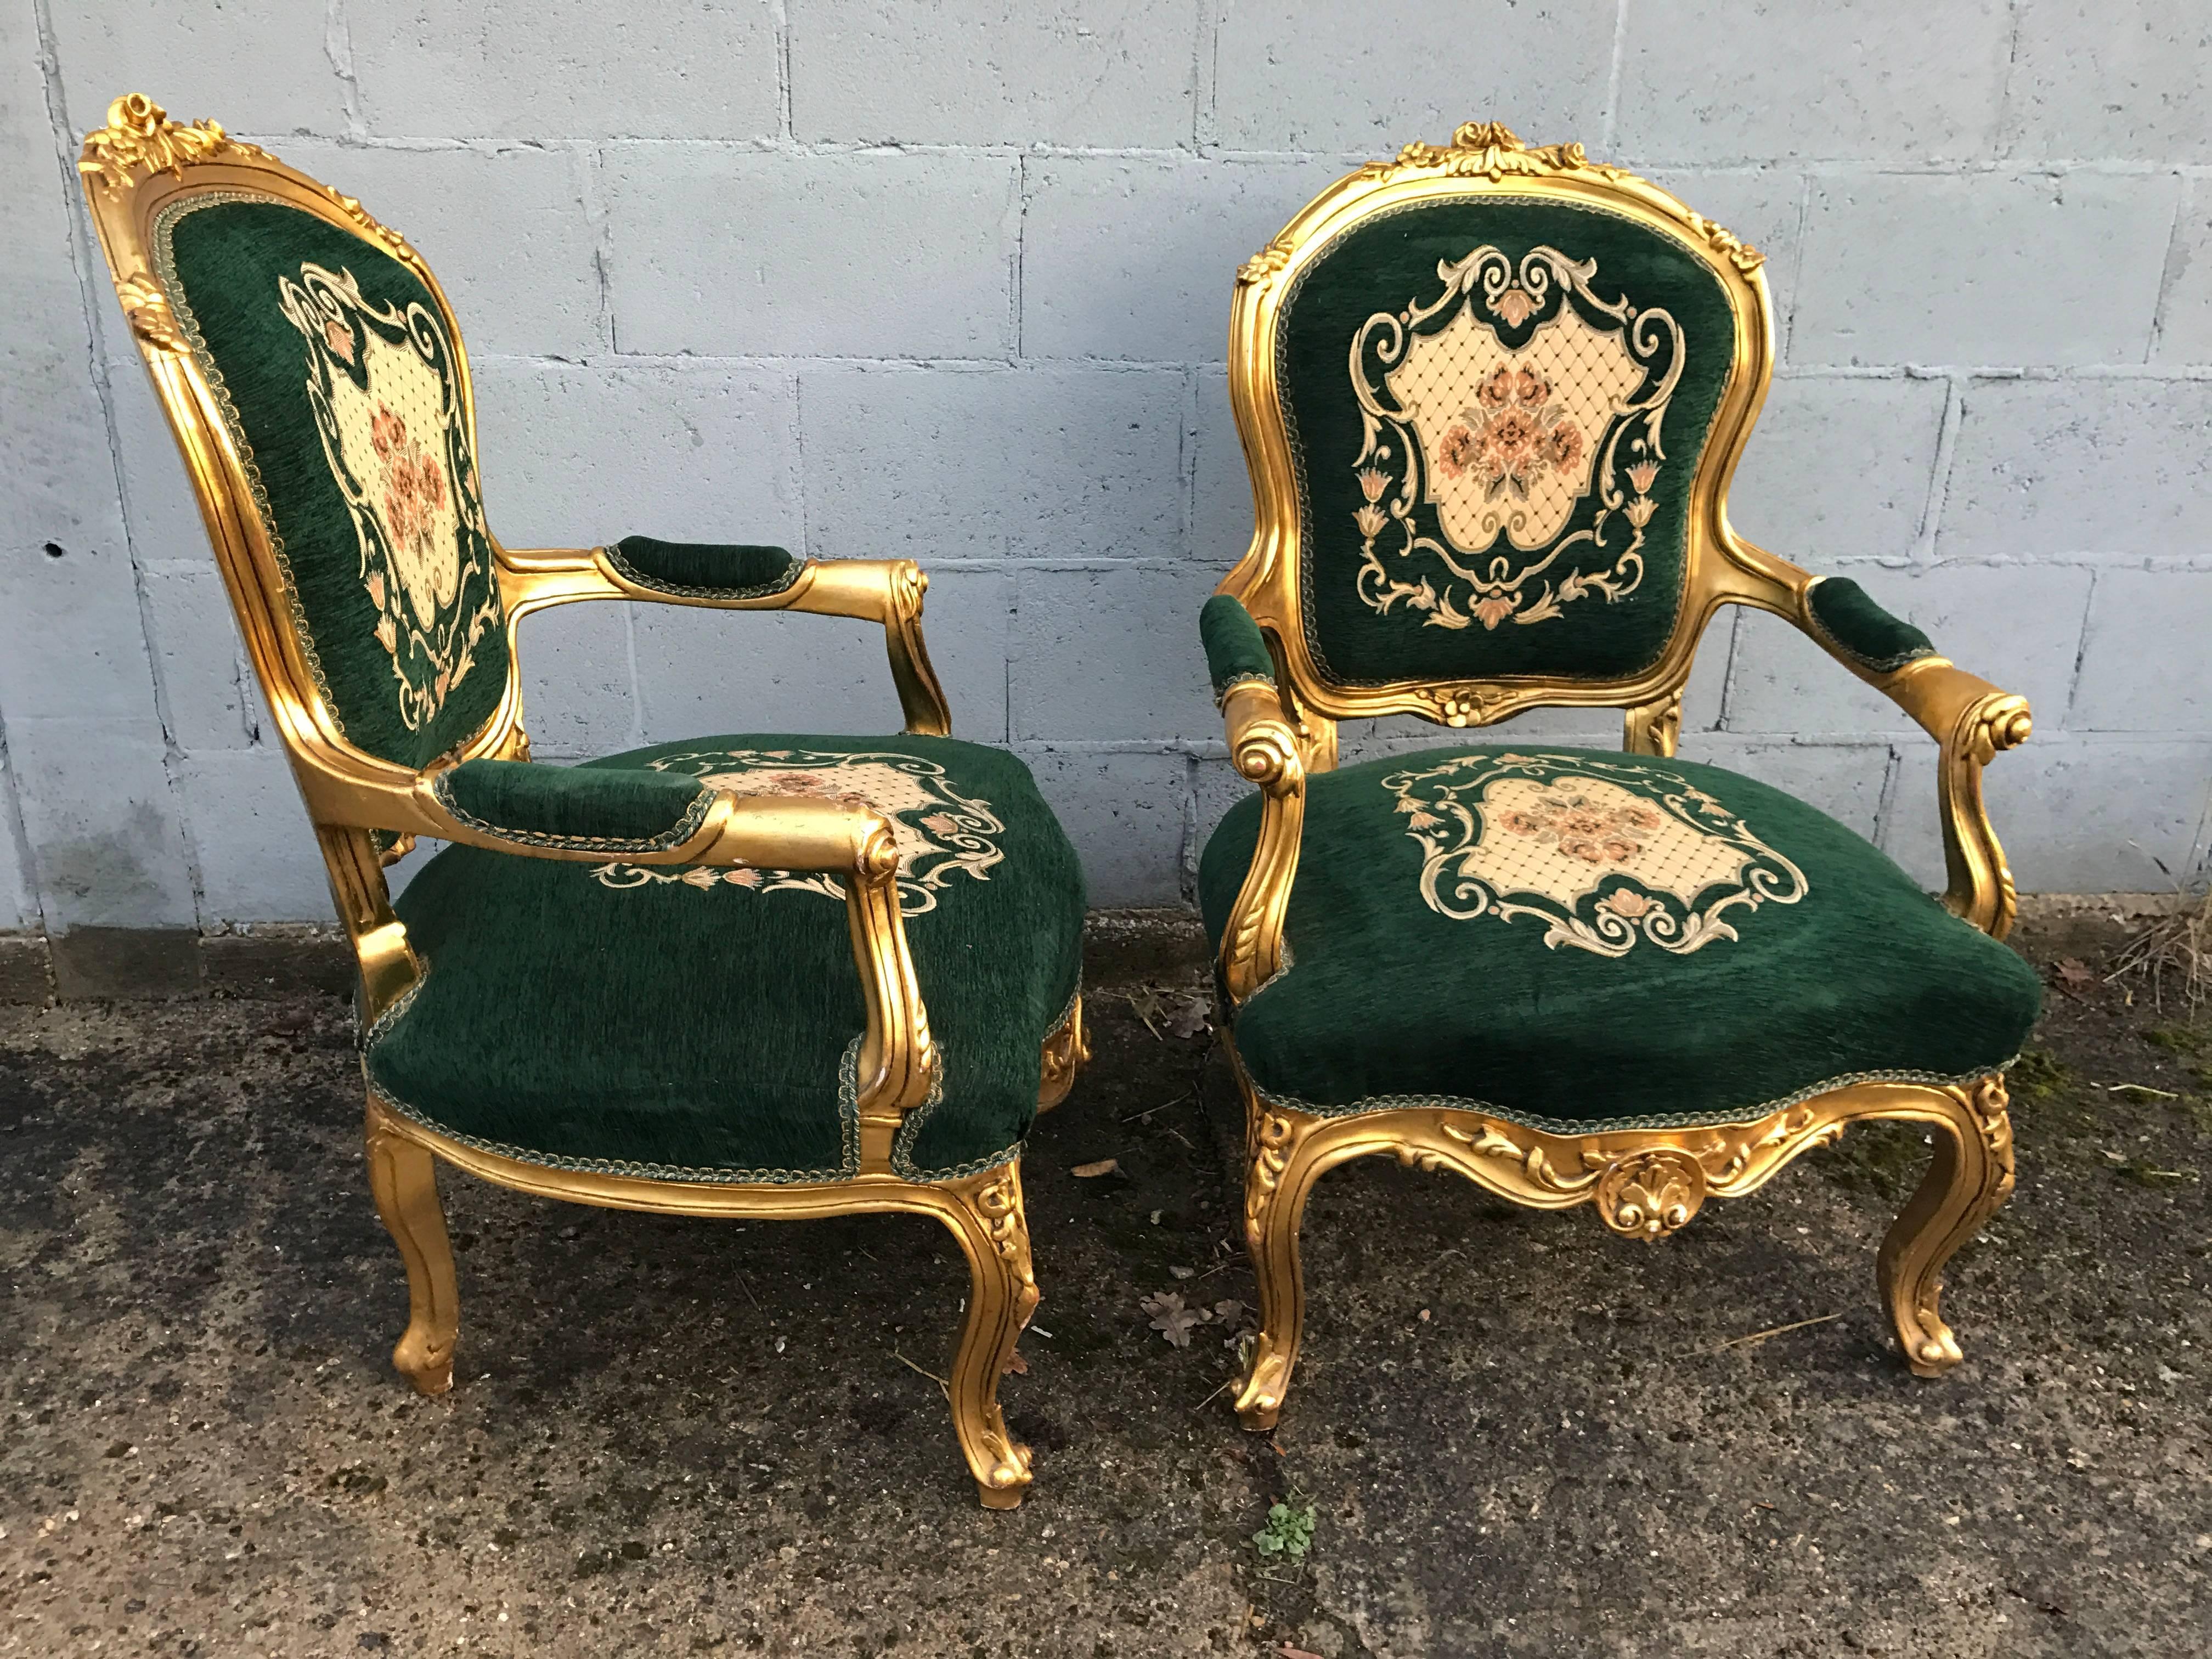 A lovely pair of French boudoir chairs from the 1940s. Original gilt frame, ever so slightly distressed in places.

Original upholstery, extremely clean for the age. No rips, tares or stains. Lovely color and pattern design.